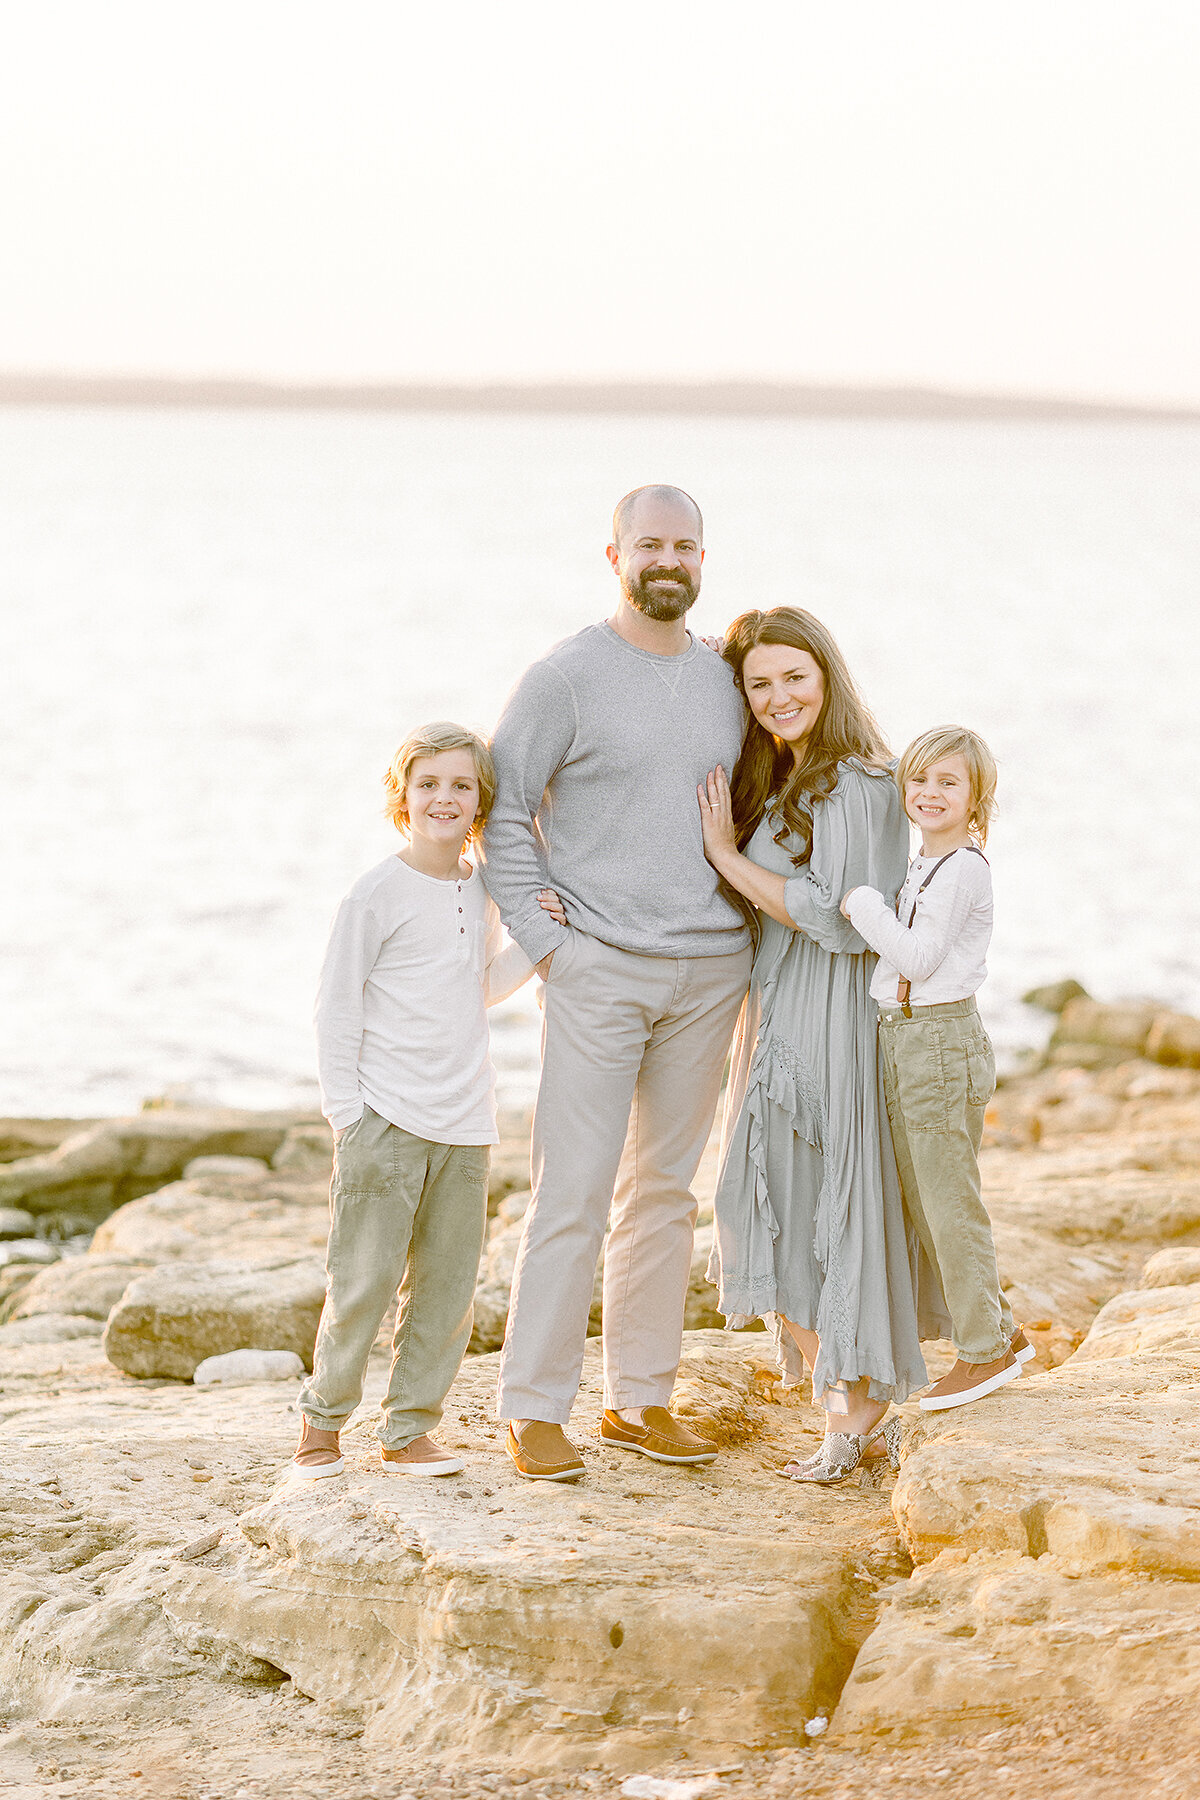 A beautiful Dallas Family posing by a lake on the rocks for family photos.